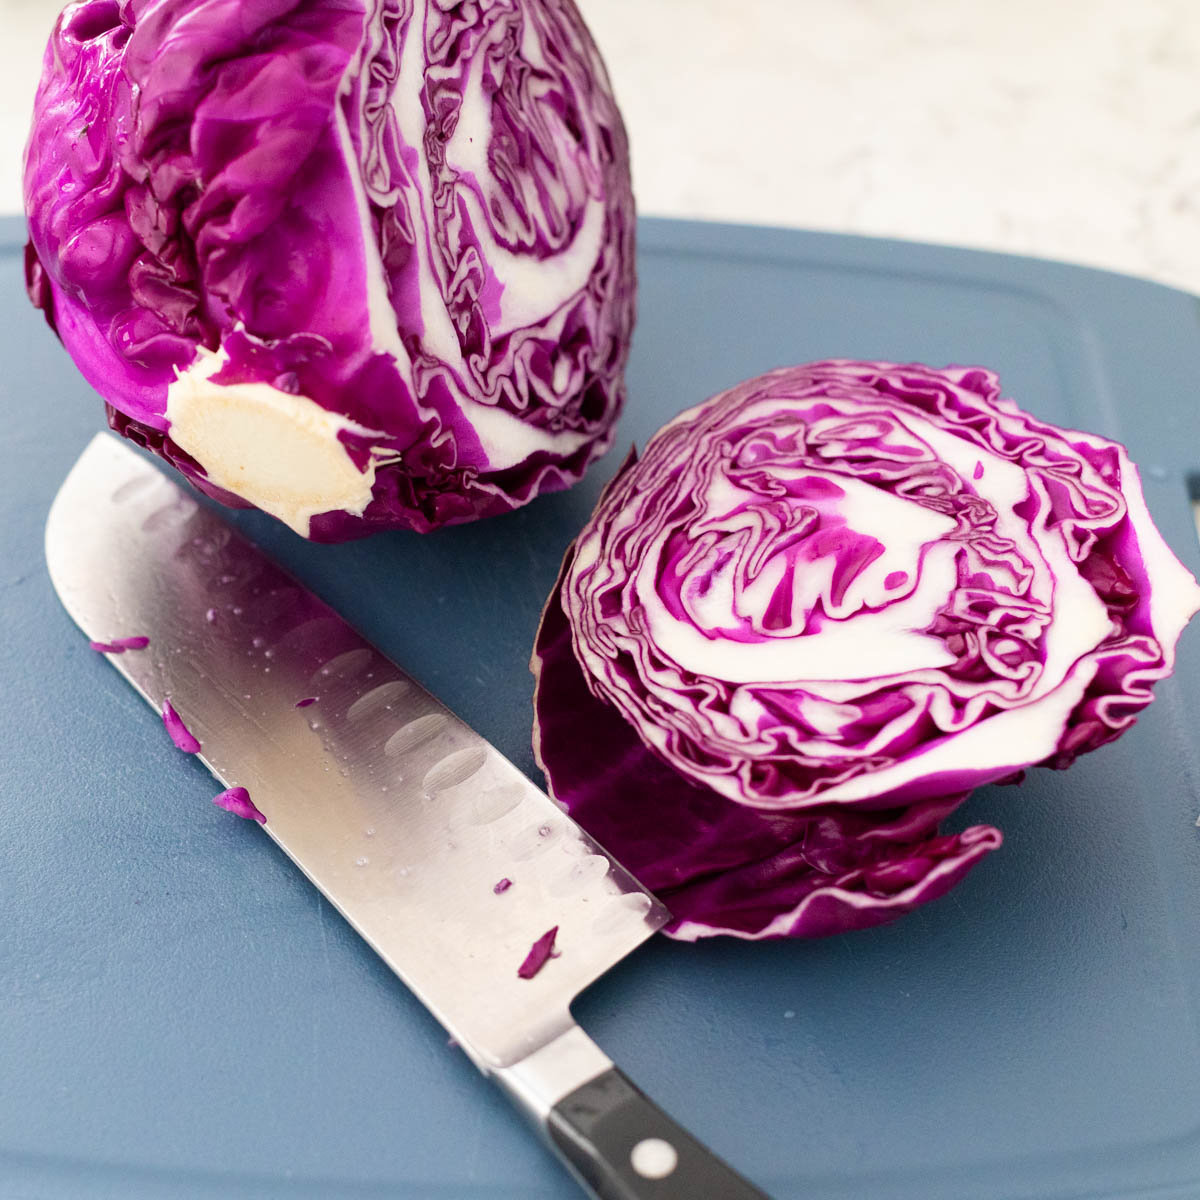 The knife has cut the cabbage head just off from center of the stem.